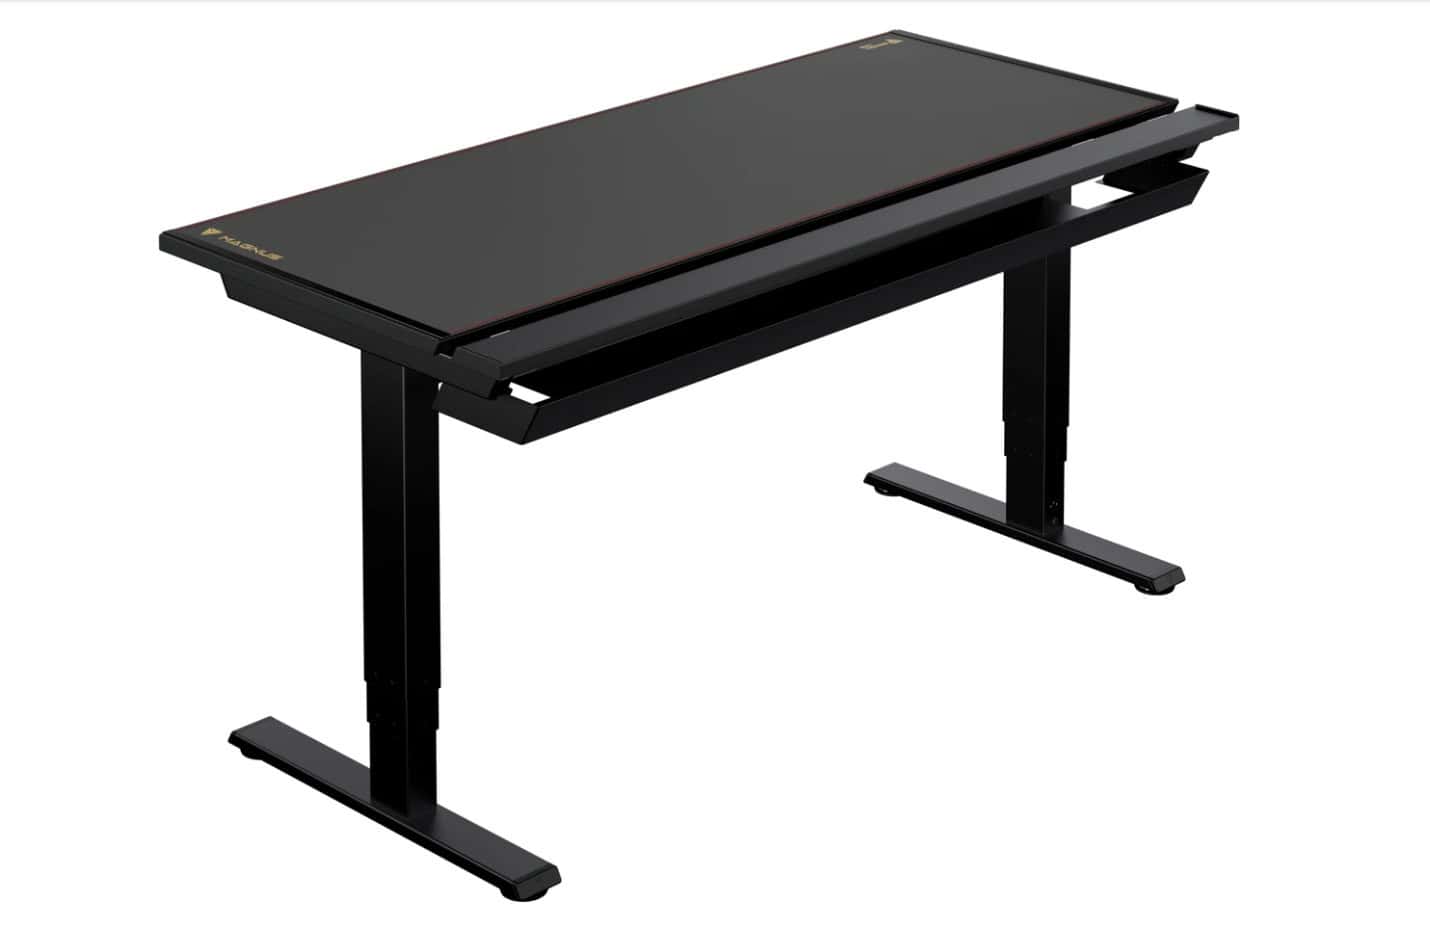 A black adjustable Secretlab Magnus Pro standing desk with a sleek top and sturdy metal legs, positioned on a plain white background.